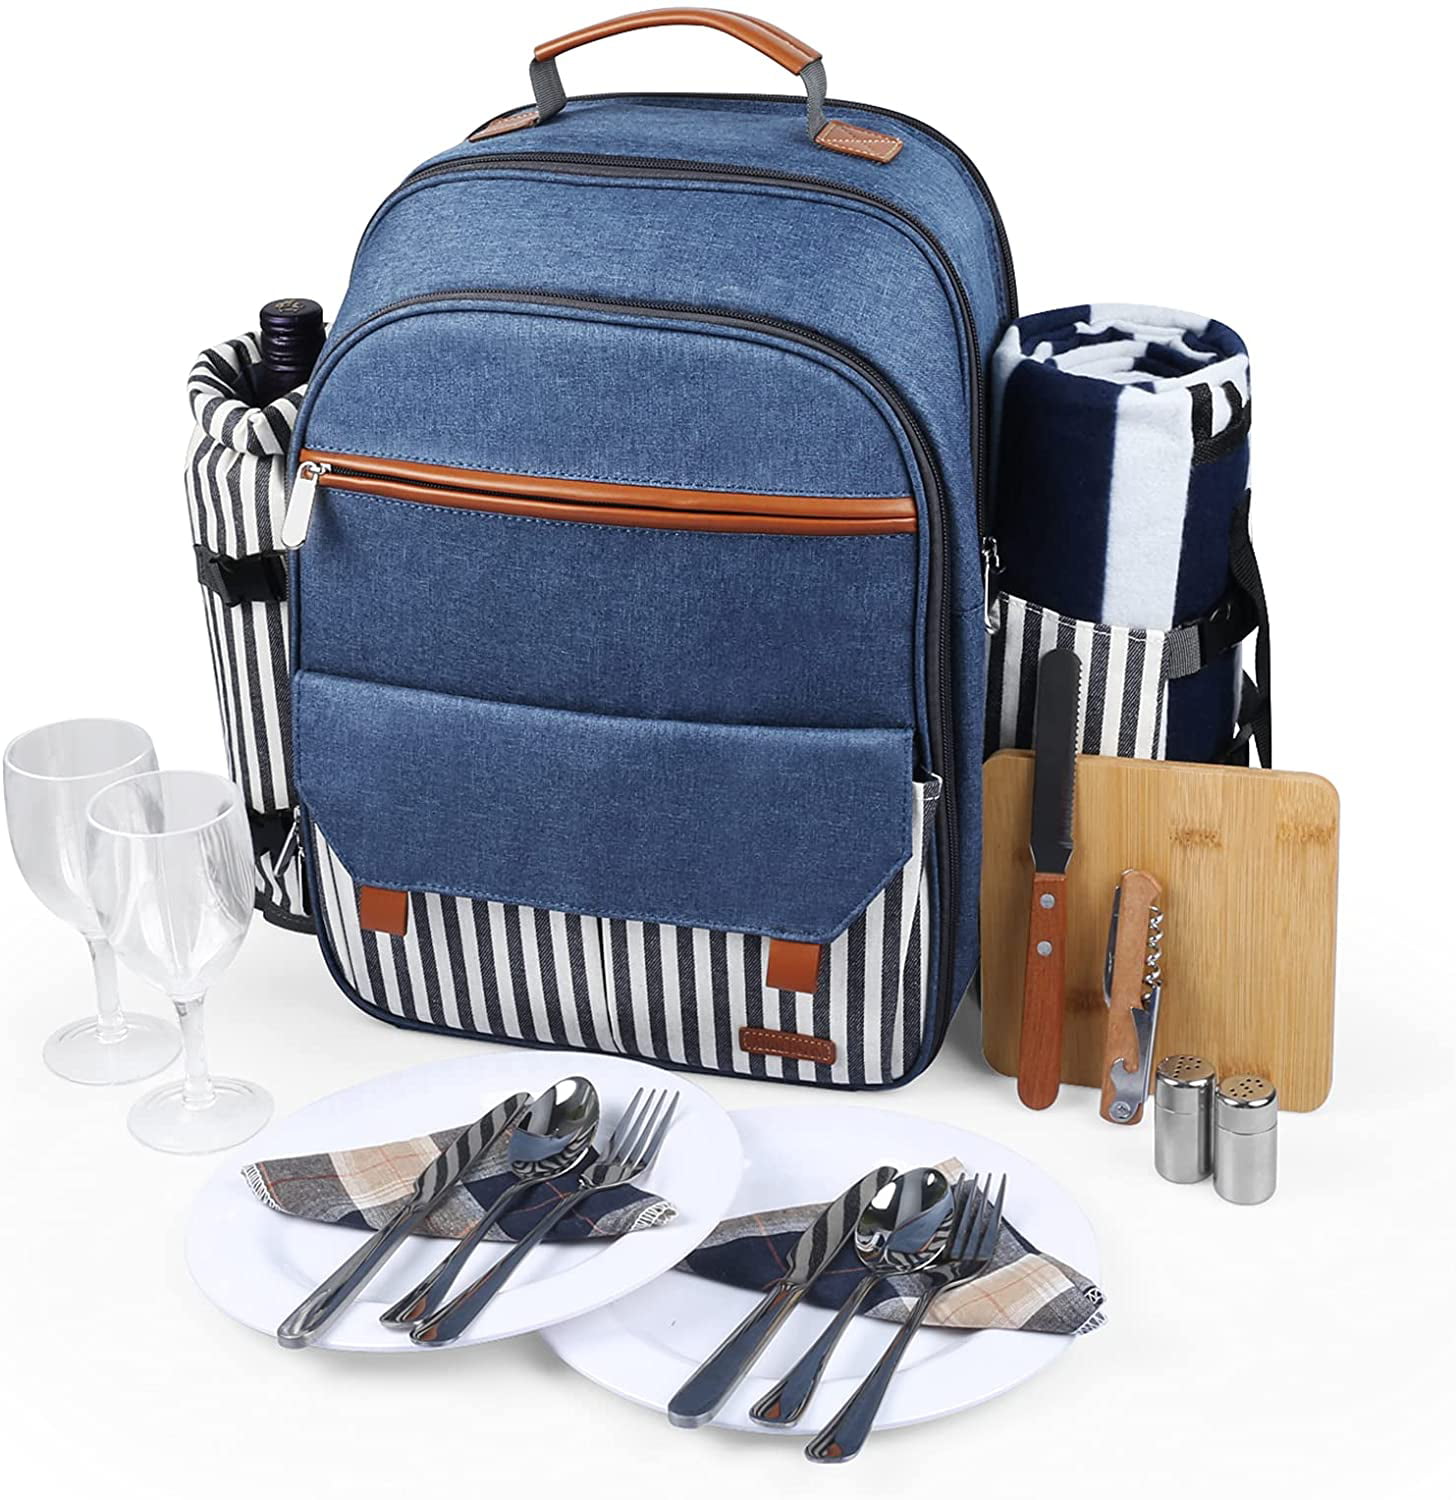 Small Navy Blue Insulated Picnic Basket Lunch Tote Cooler Picnic Backpack w/ Two Place Setting 